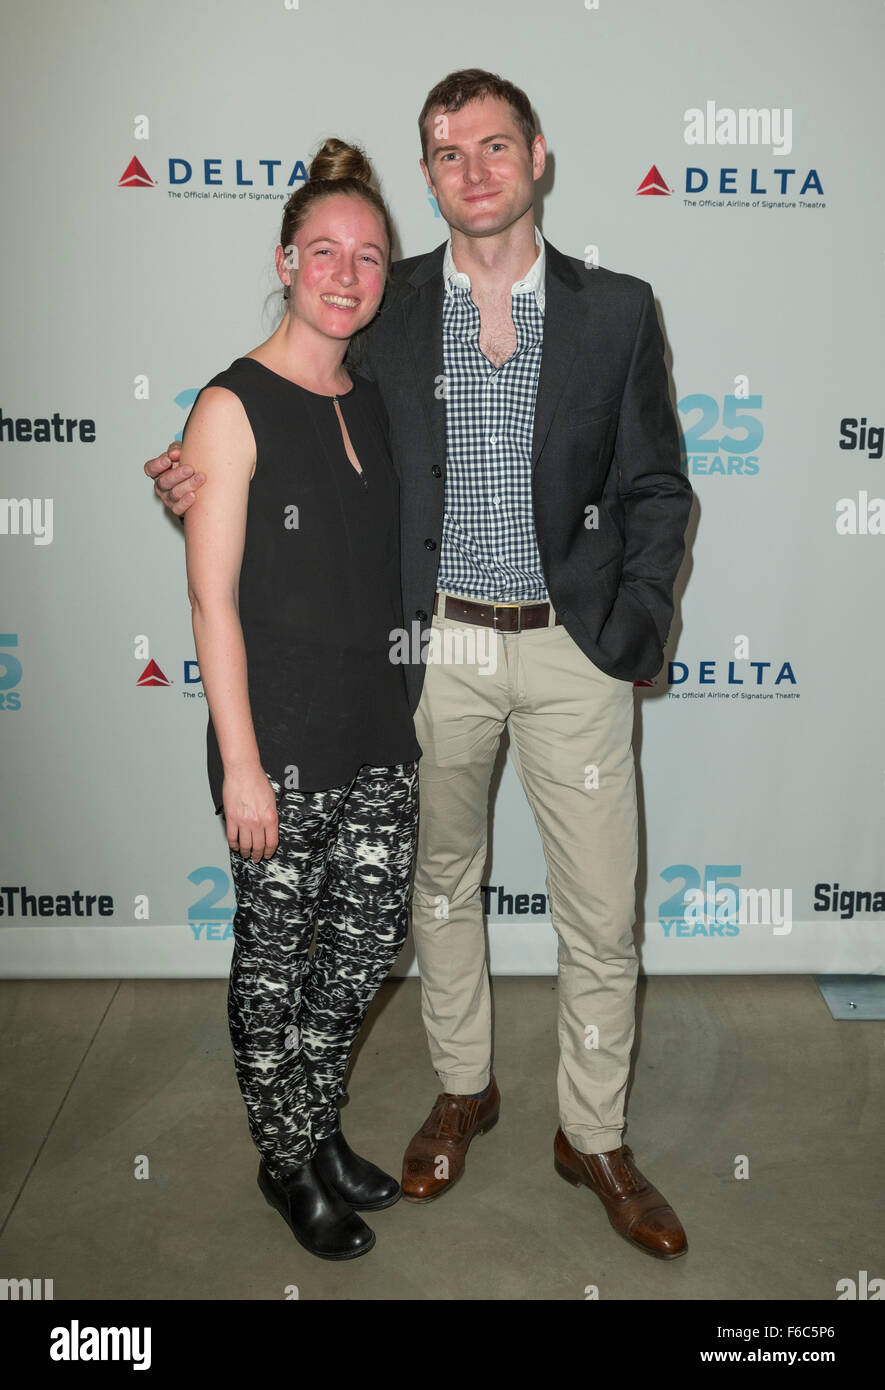 New York, NY - November 15: Quinlan Corbett & guest attend Incident At Vichy opening night party at Signature Theatre Company The Pershing Square Signature Center Stock Photo